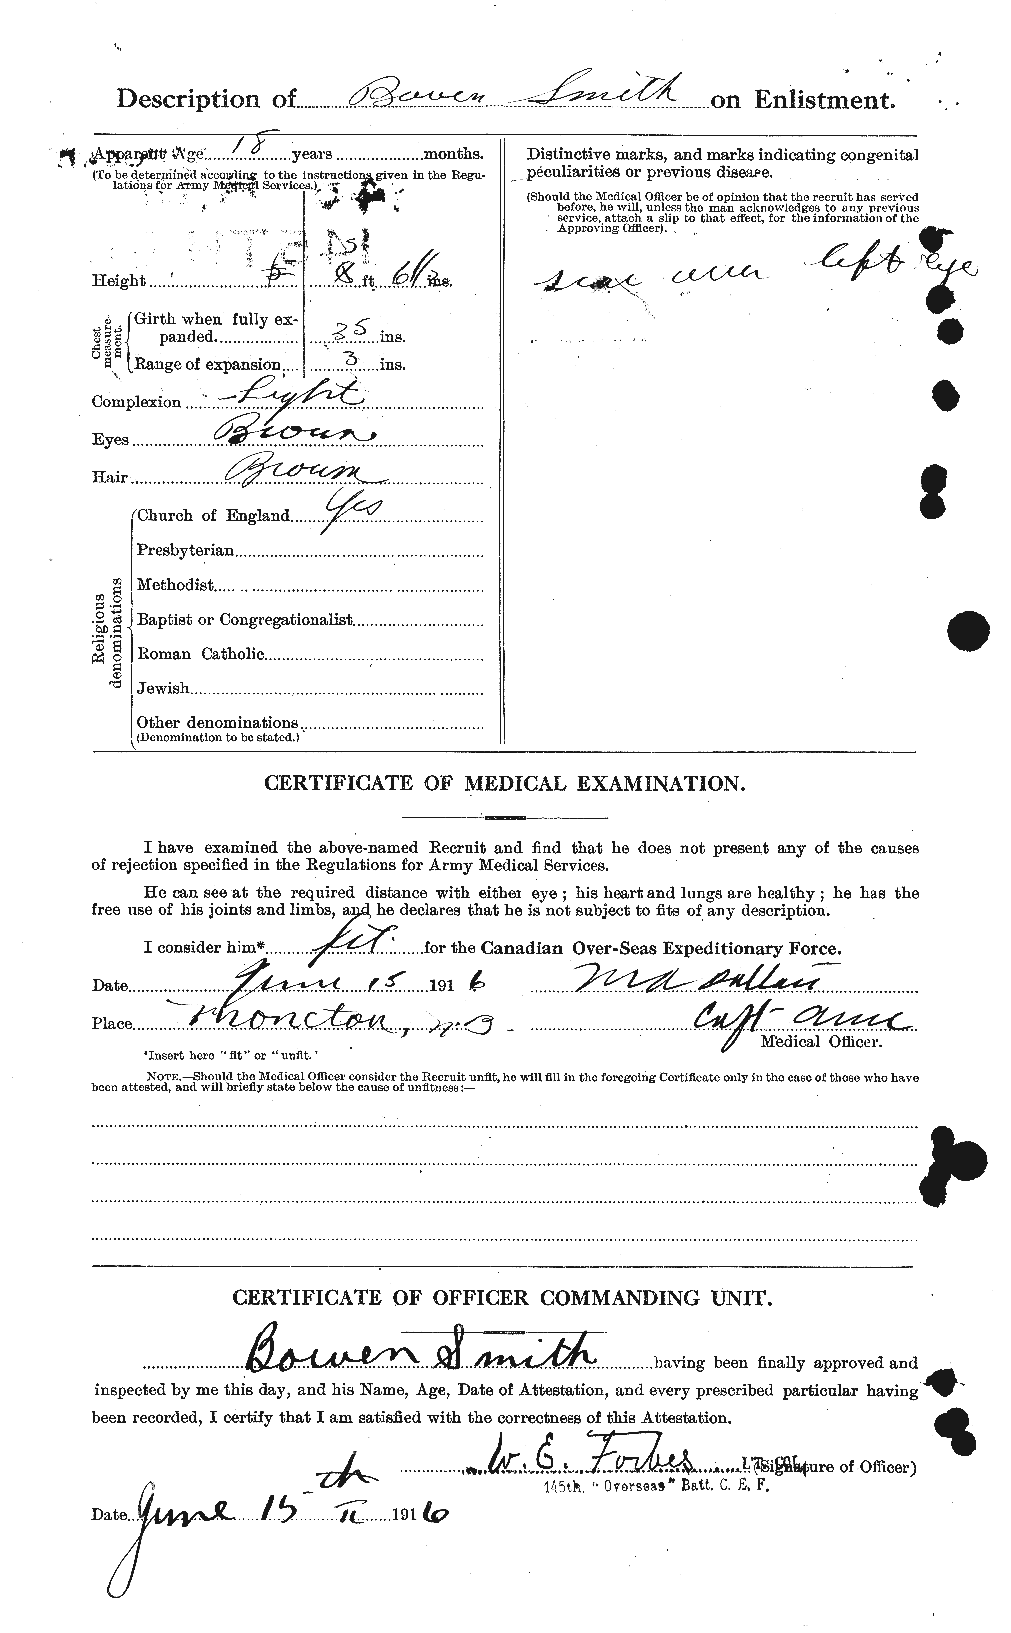 Personnel Records of the First World War - CEF 100834b